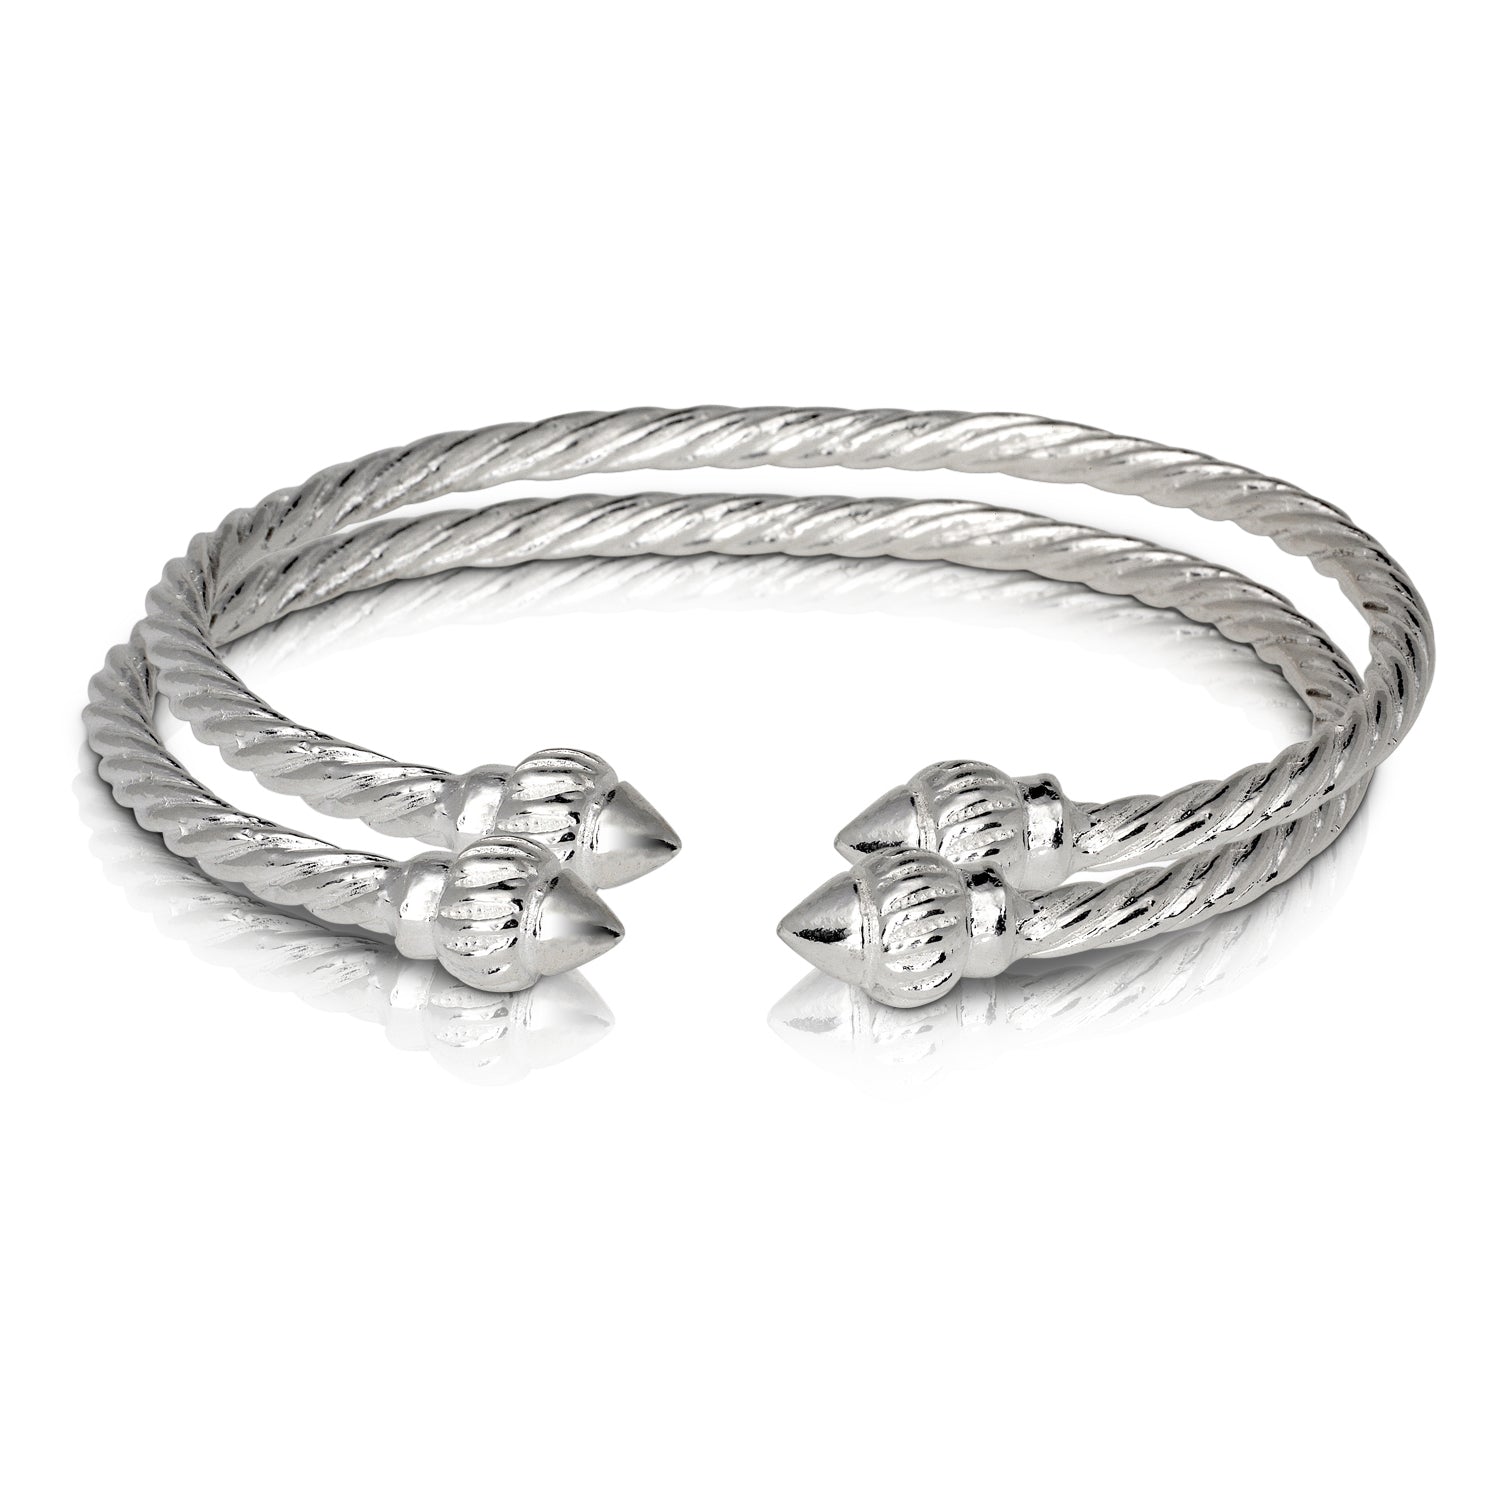 RIDGED ARROW COILED ROPE WEST INDIAN BANGLES .925 STERLING SILVER (MADE IN USA) (PAIR) - Betterjewelry